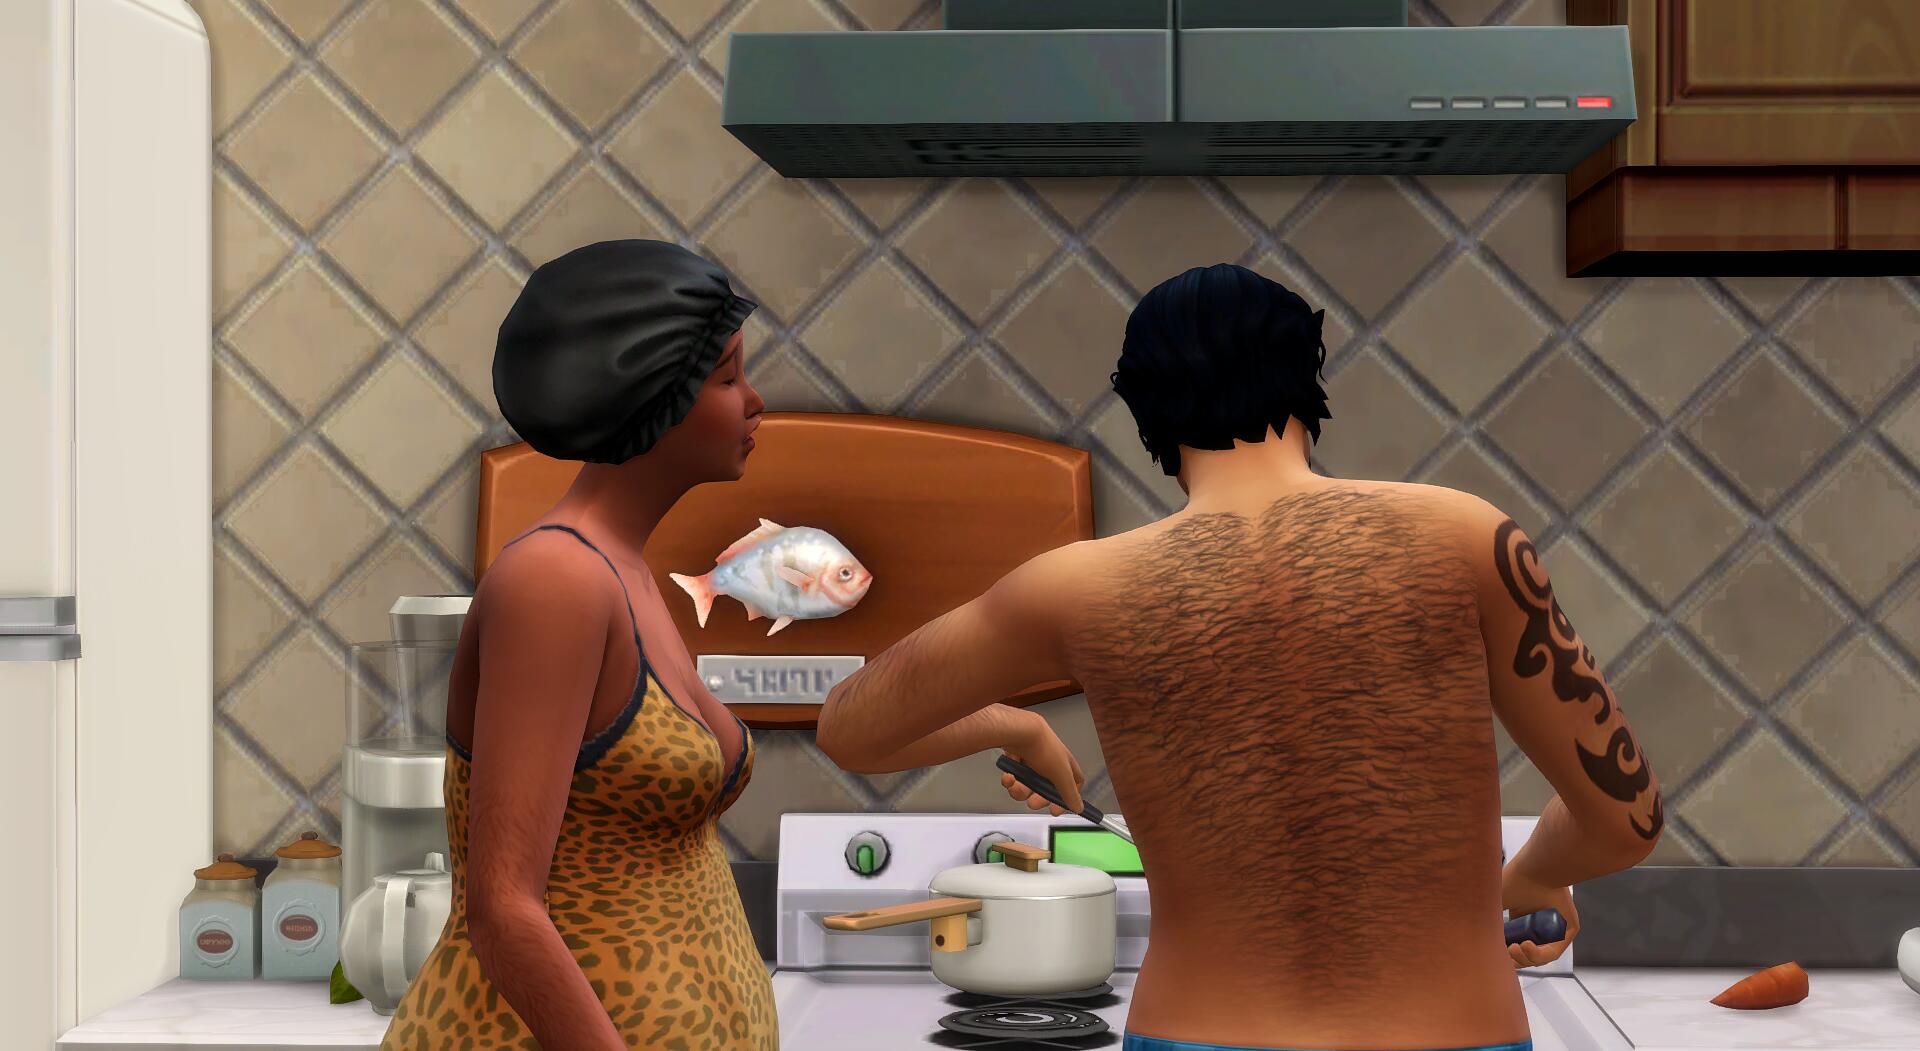 alondra complaining to her husband while he cooks breakfast (average morning)